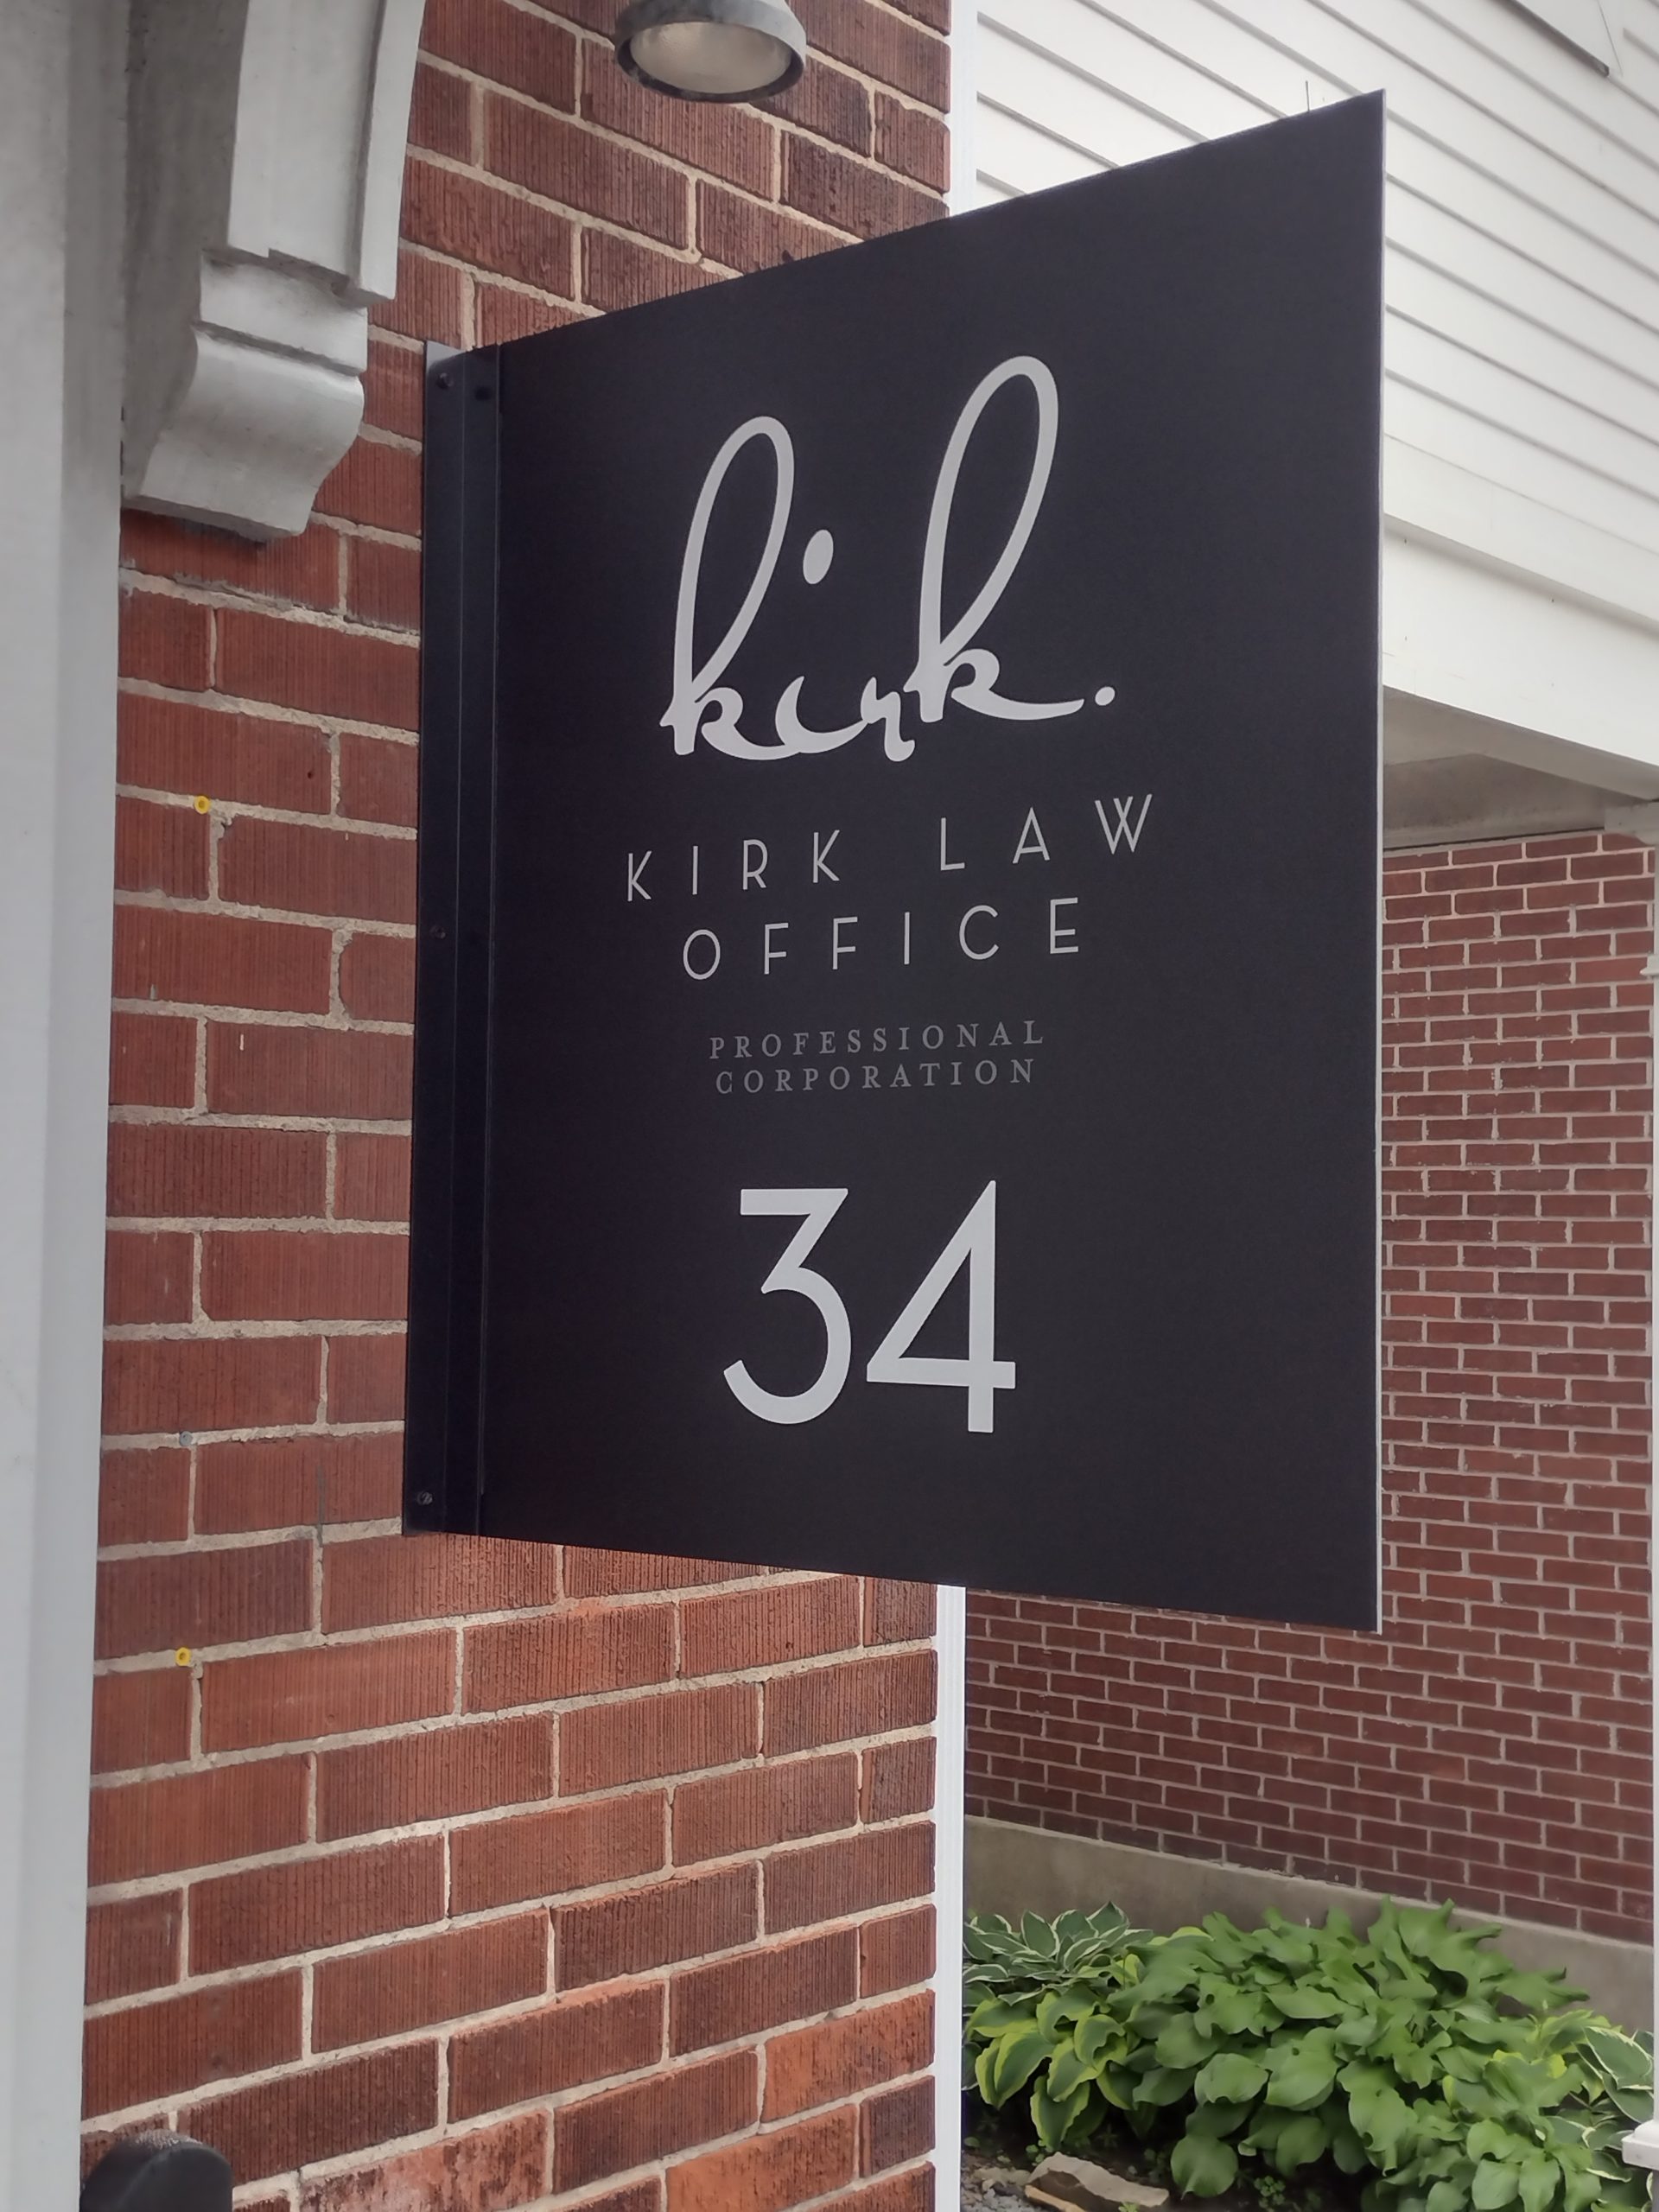 Kirk Law outdoor signage